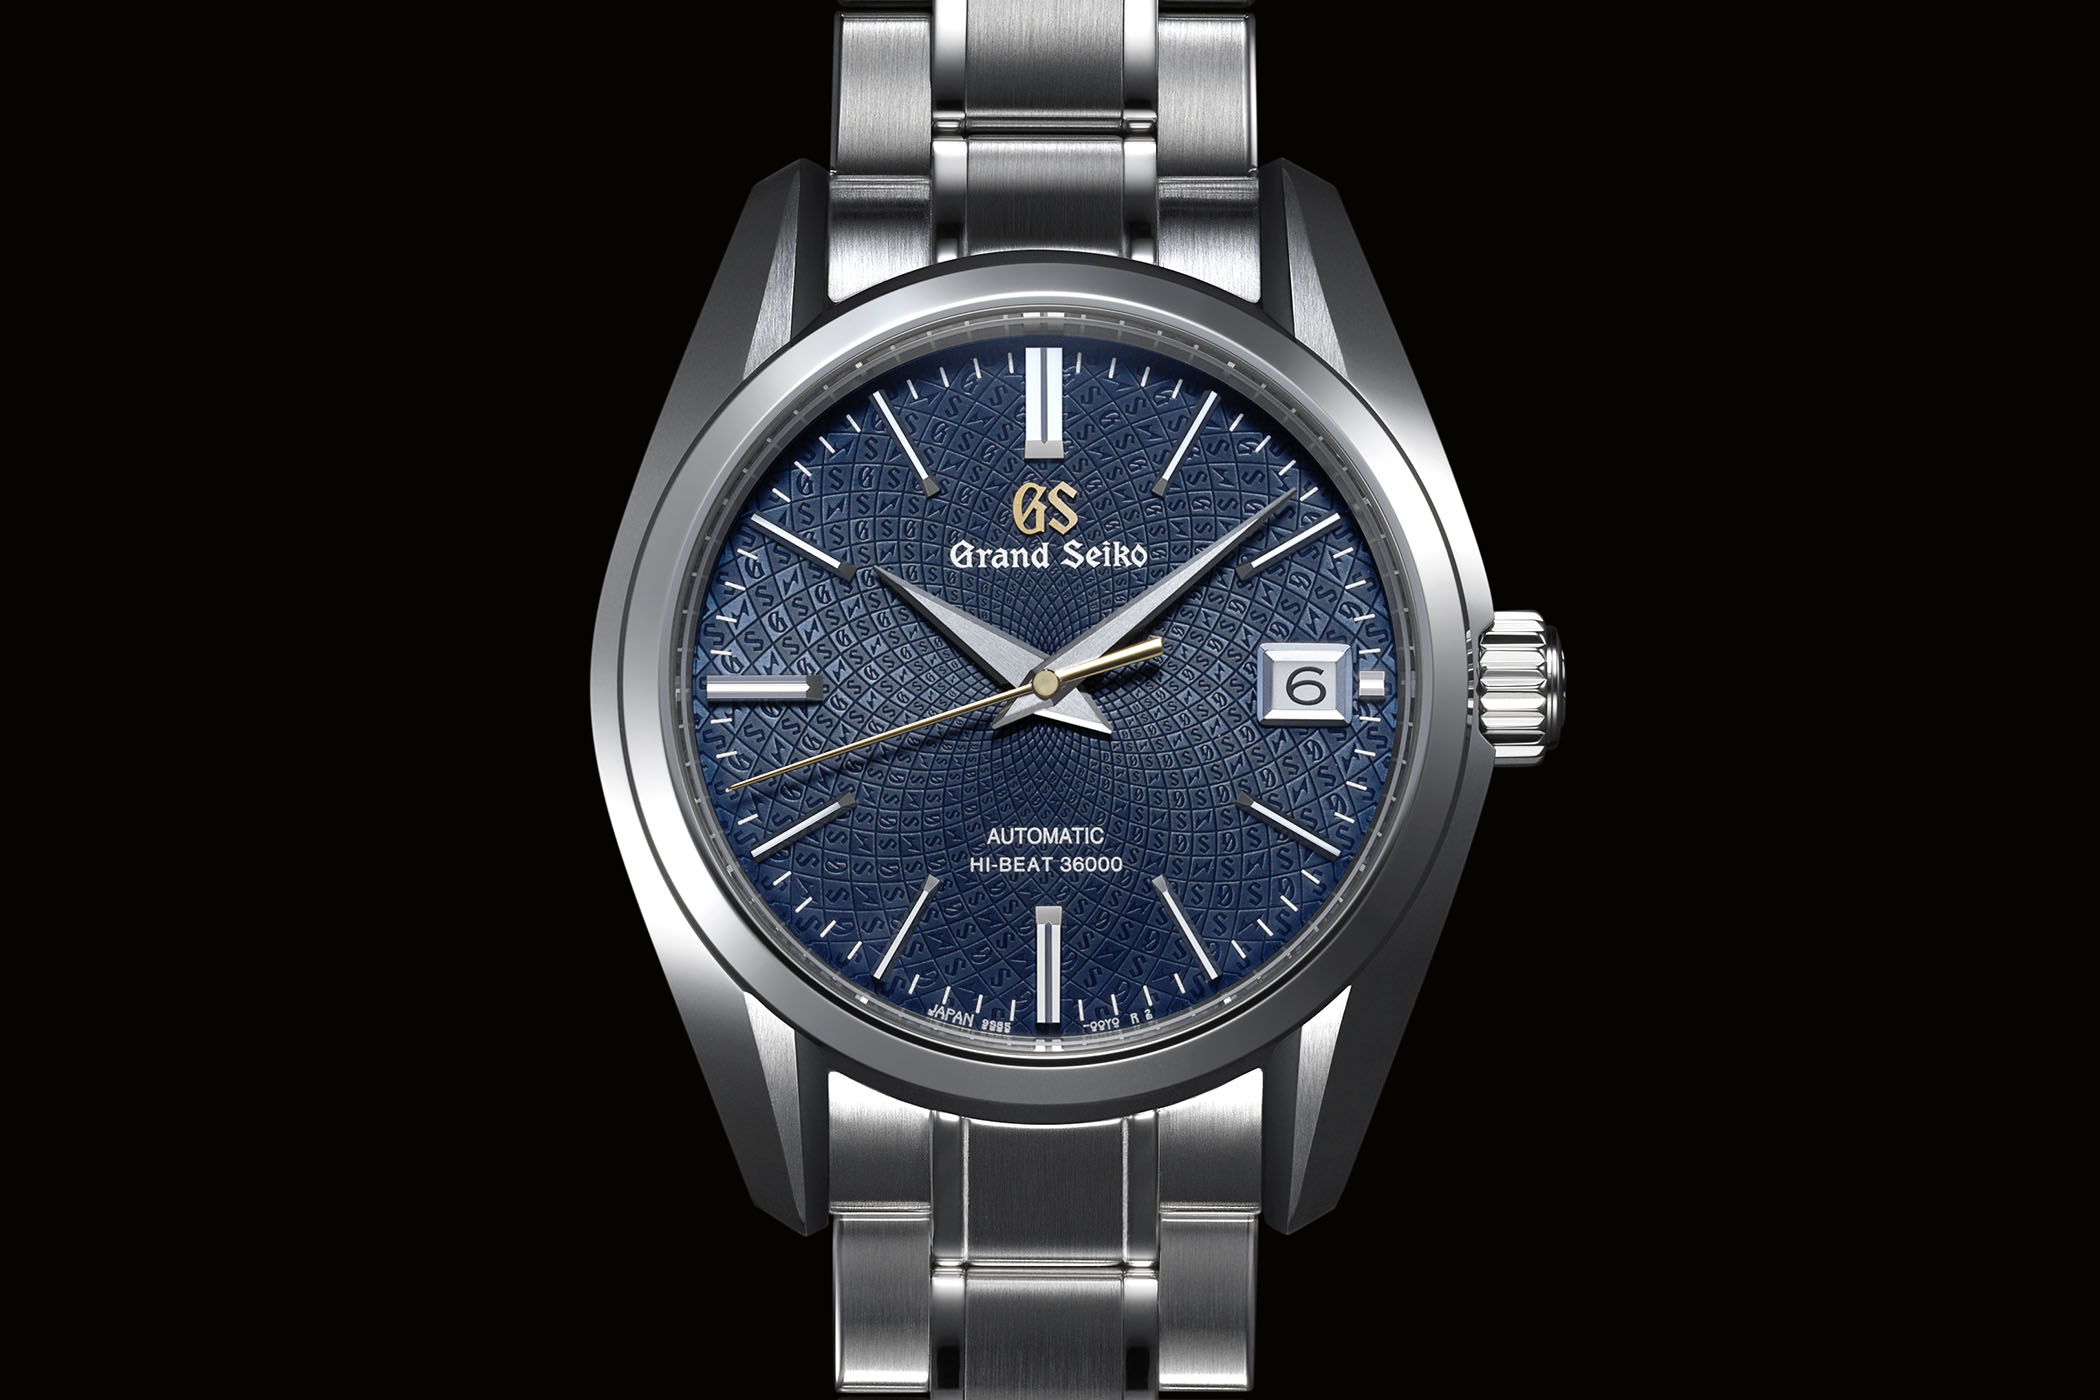 Baselworld 2018: Grand Seiko Celebrates the 20th Anniversary of Calibre 9S  with Three New High-Beat Limited Edition Watches